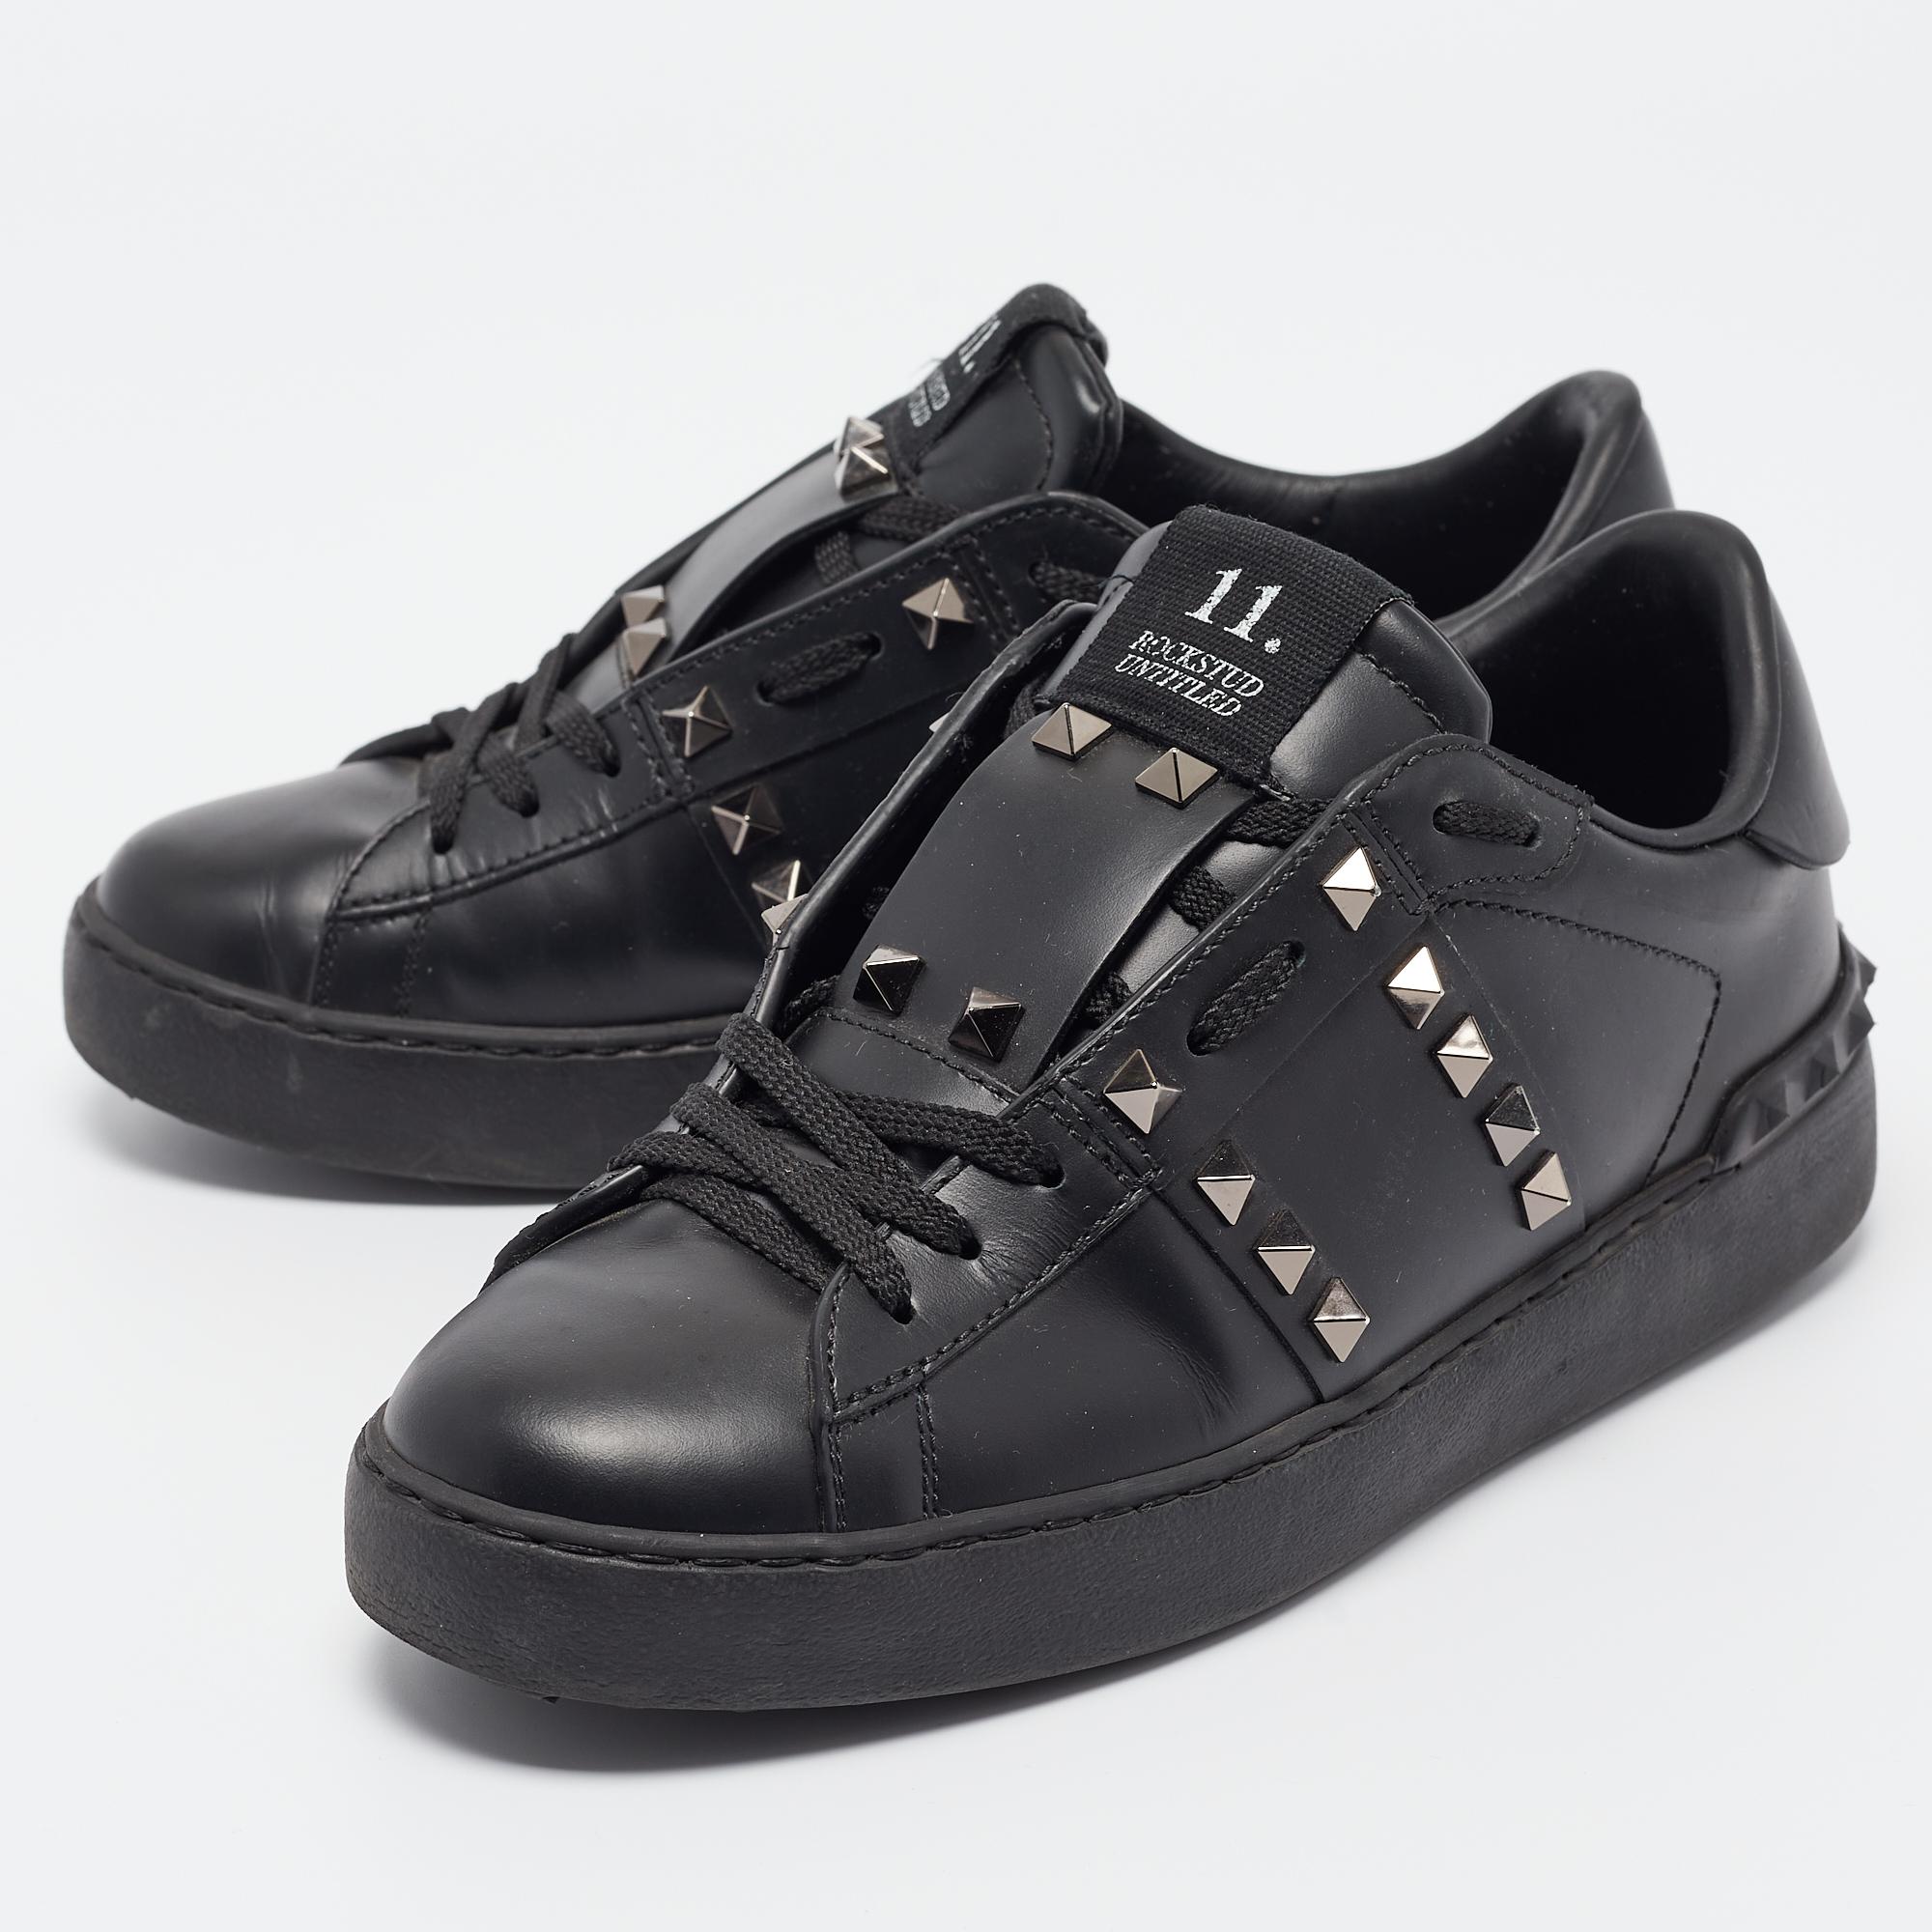 Valentino Black Leather Rockstud Low Top Sneakers Size 36.5 2